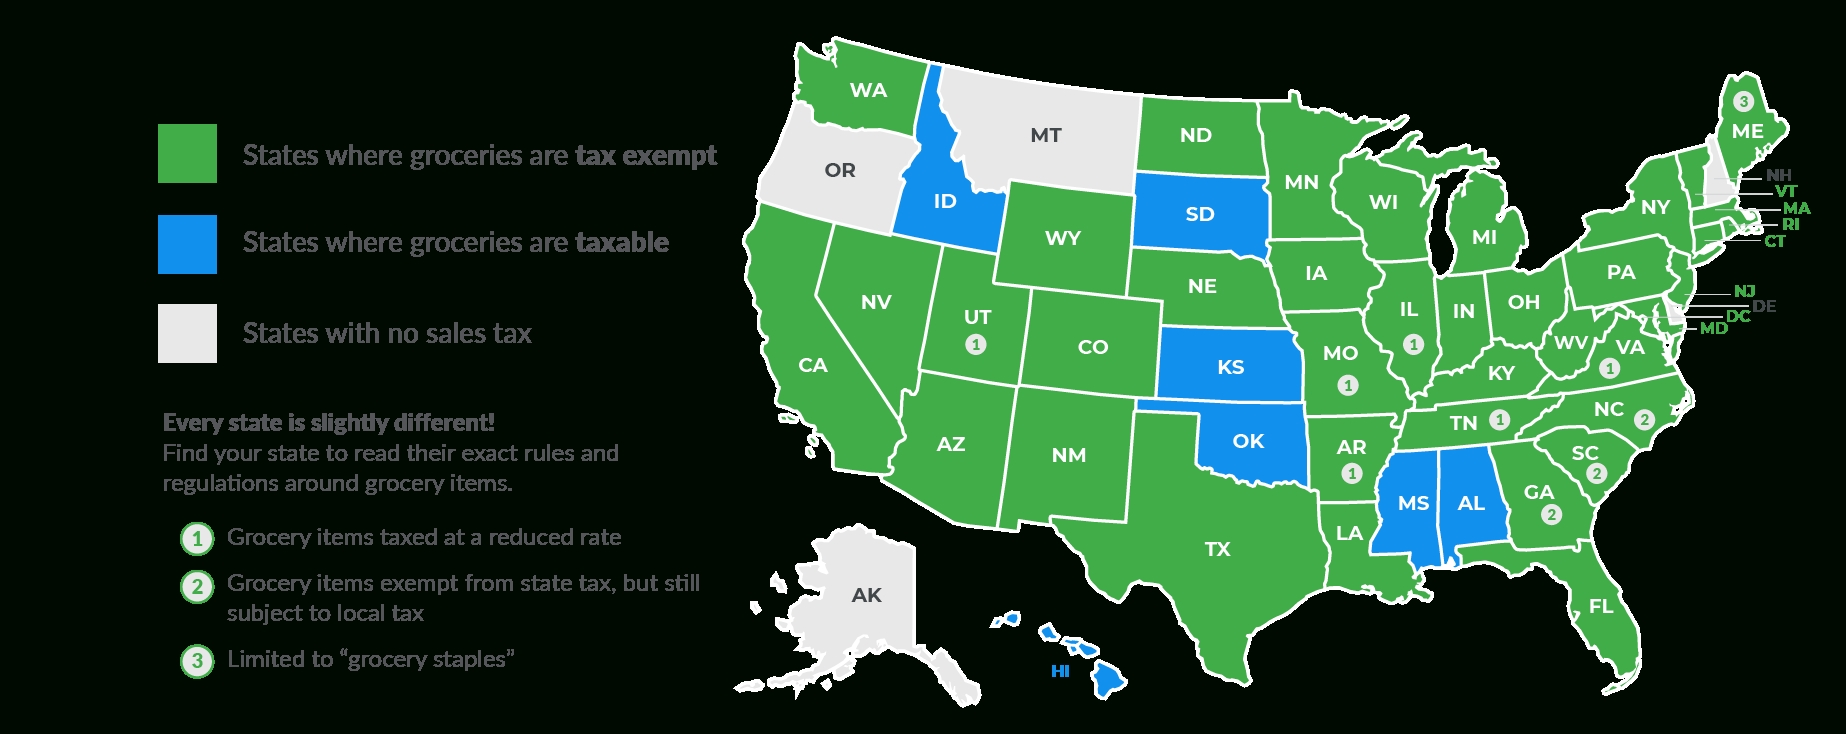 Sales Taxstate: Are Grocery Items Taxable?  Louisiana Tax Free 2020